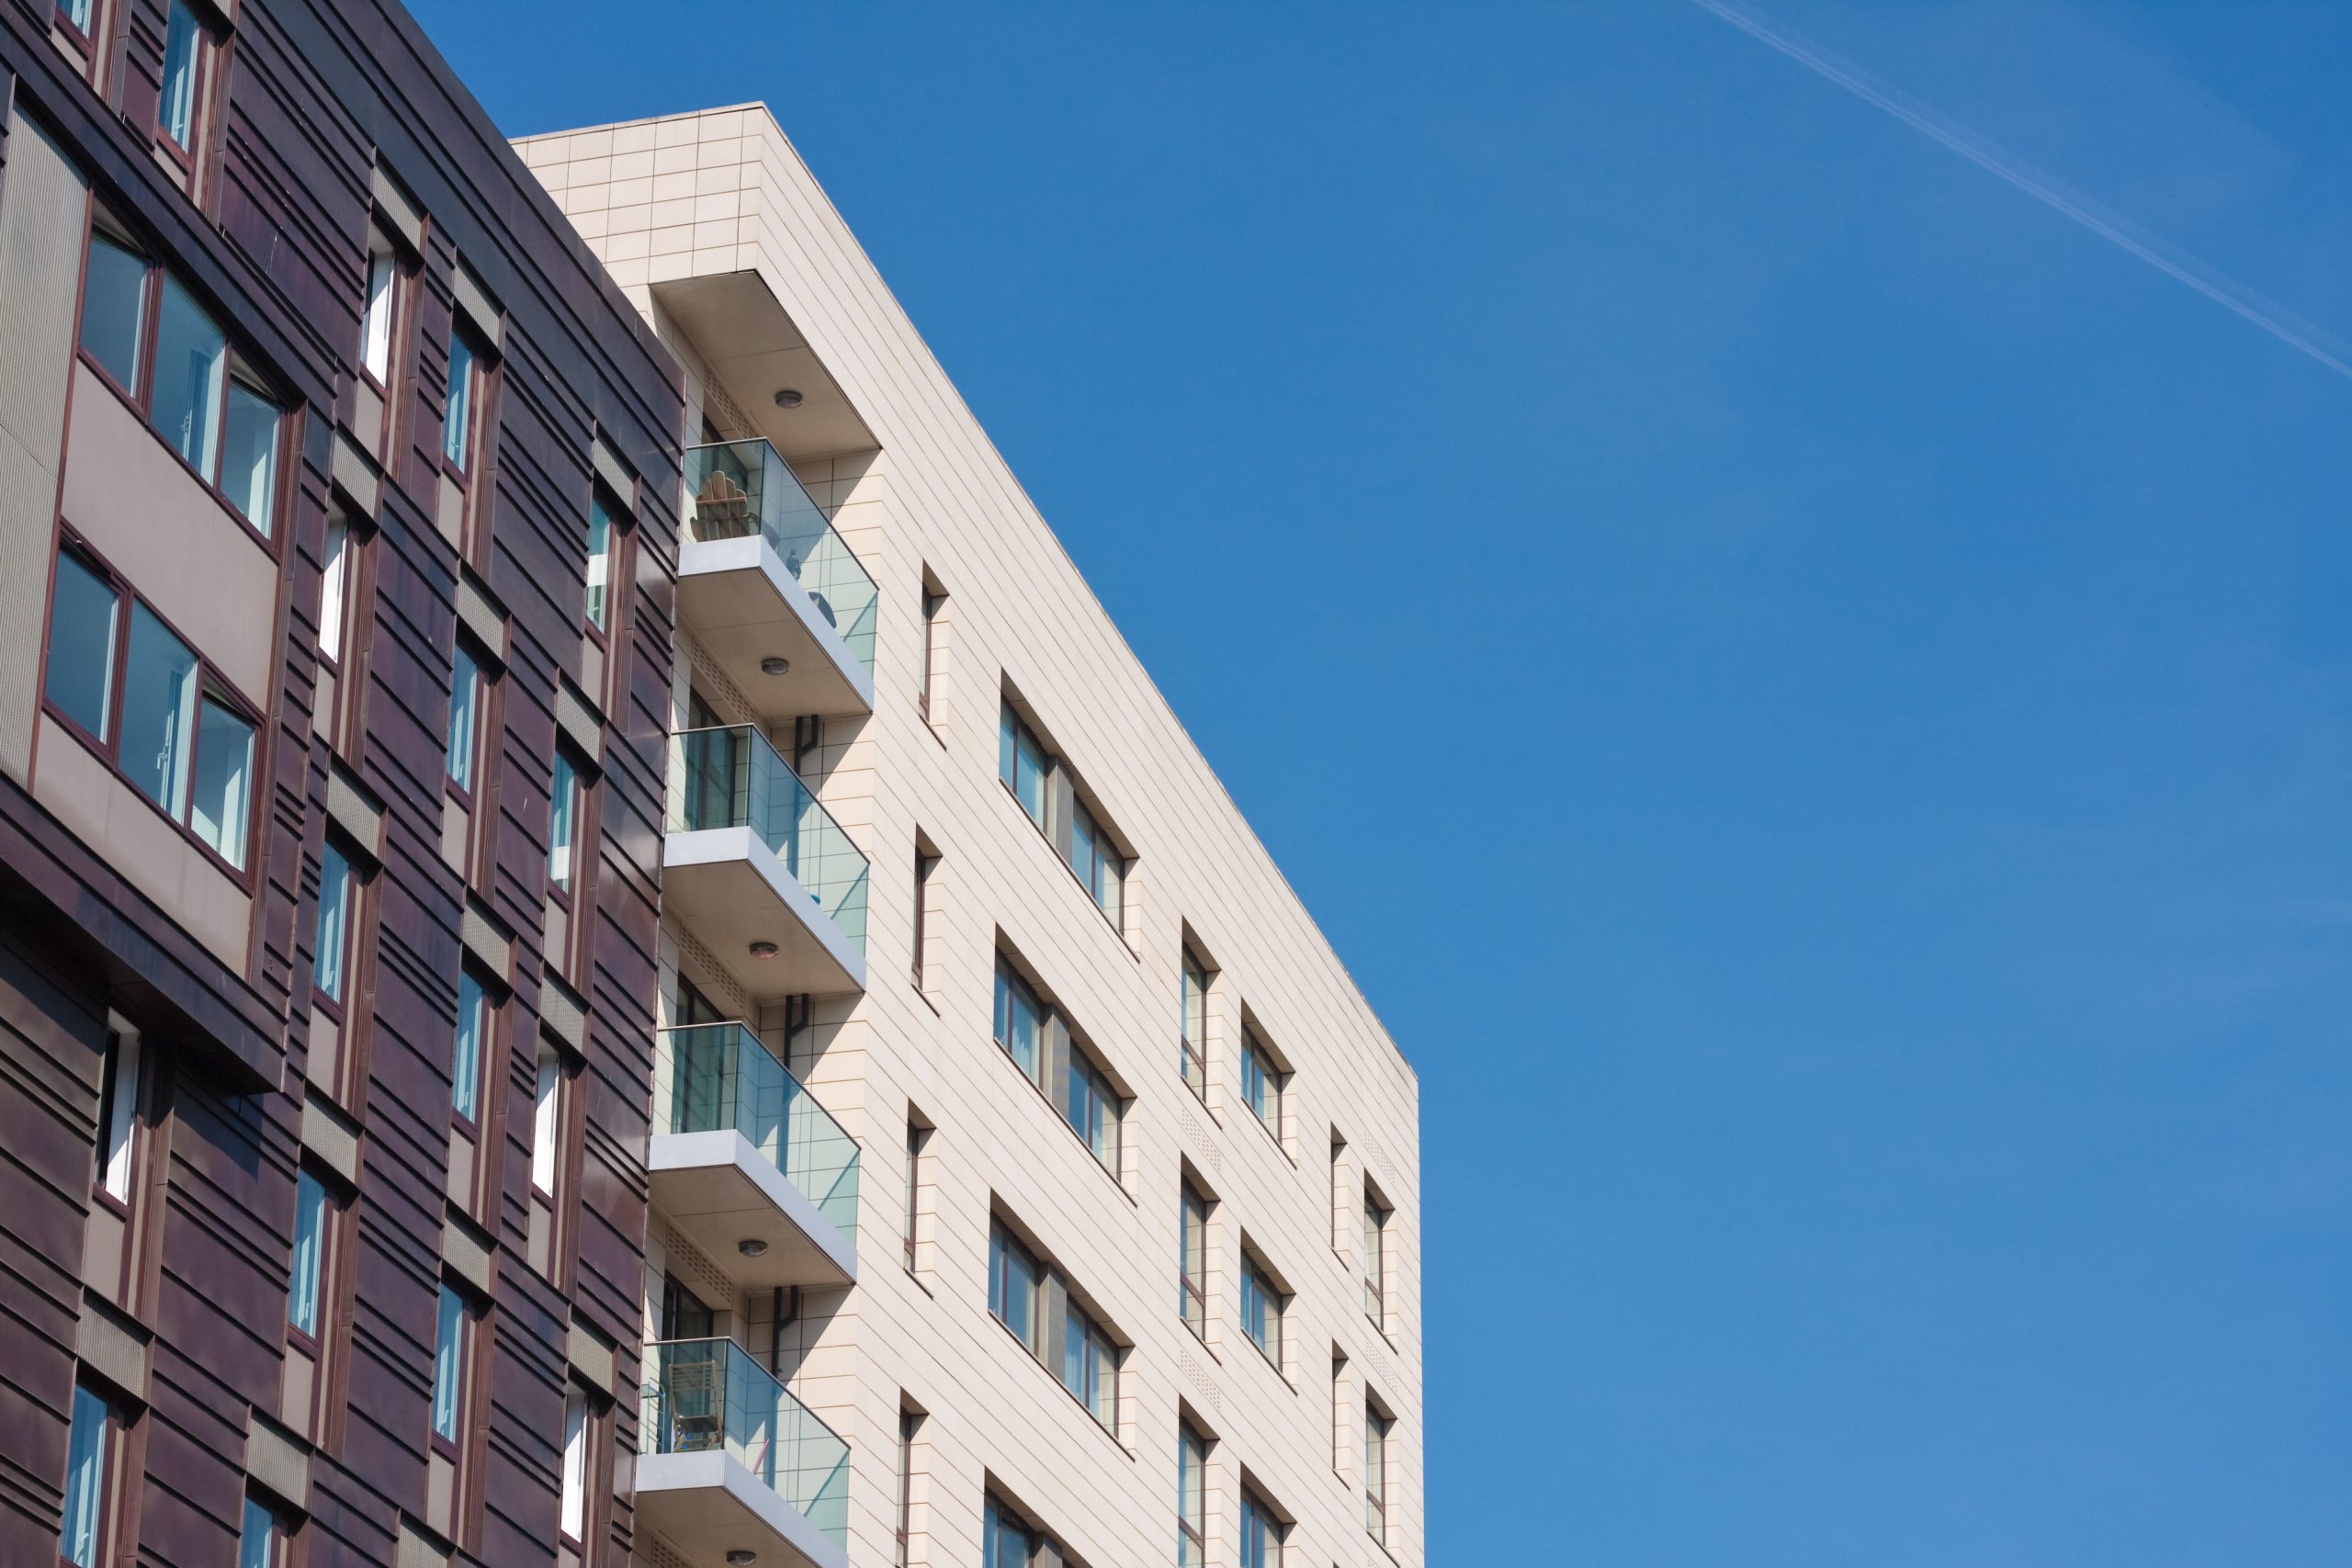 Study Shows That One in Ten Mid-Rise Buildings Requires Fire-Safety Upgrades